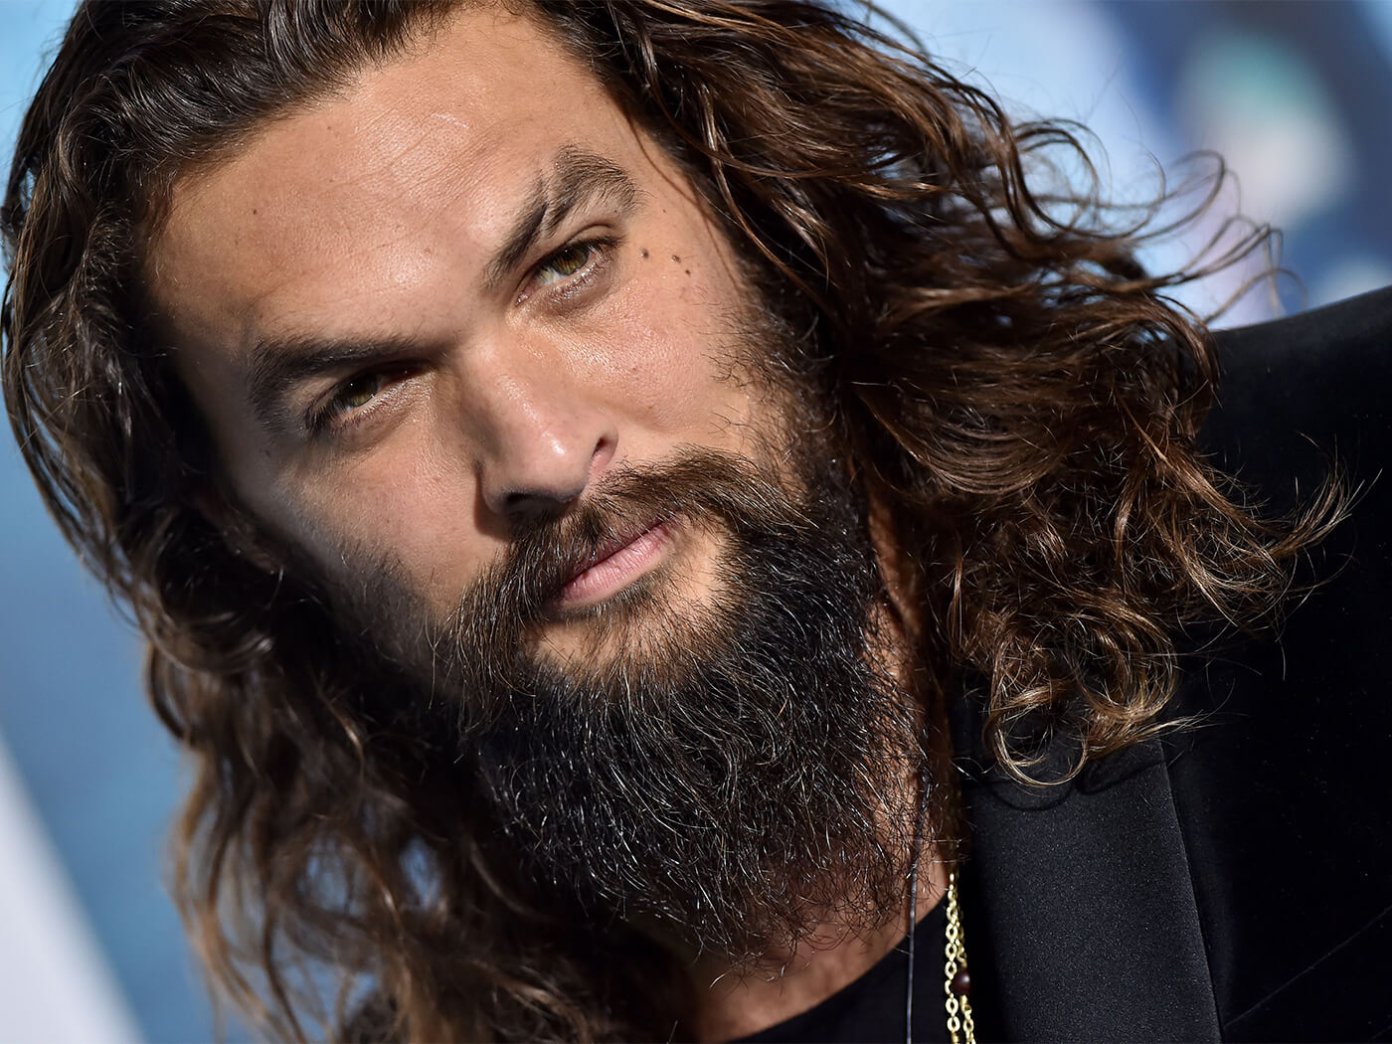 Jason Momoa: “I just want to grow old, and learn the blues”